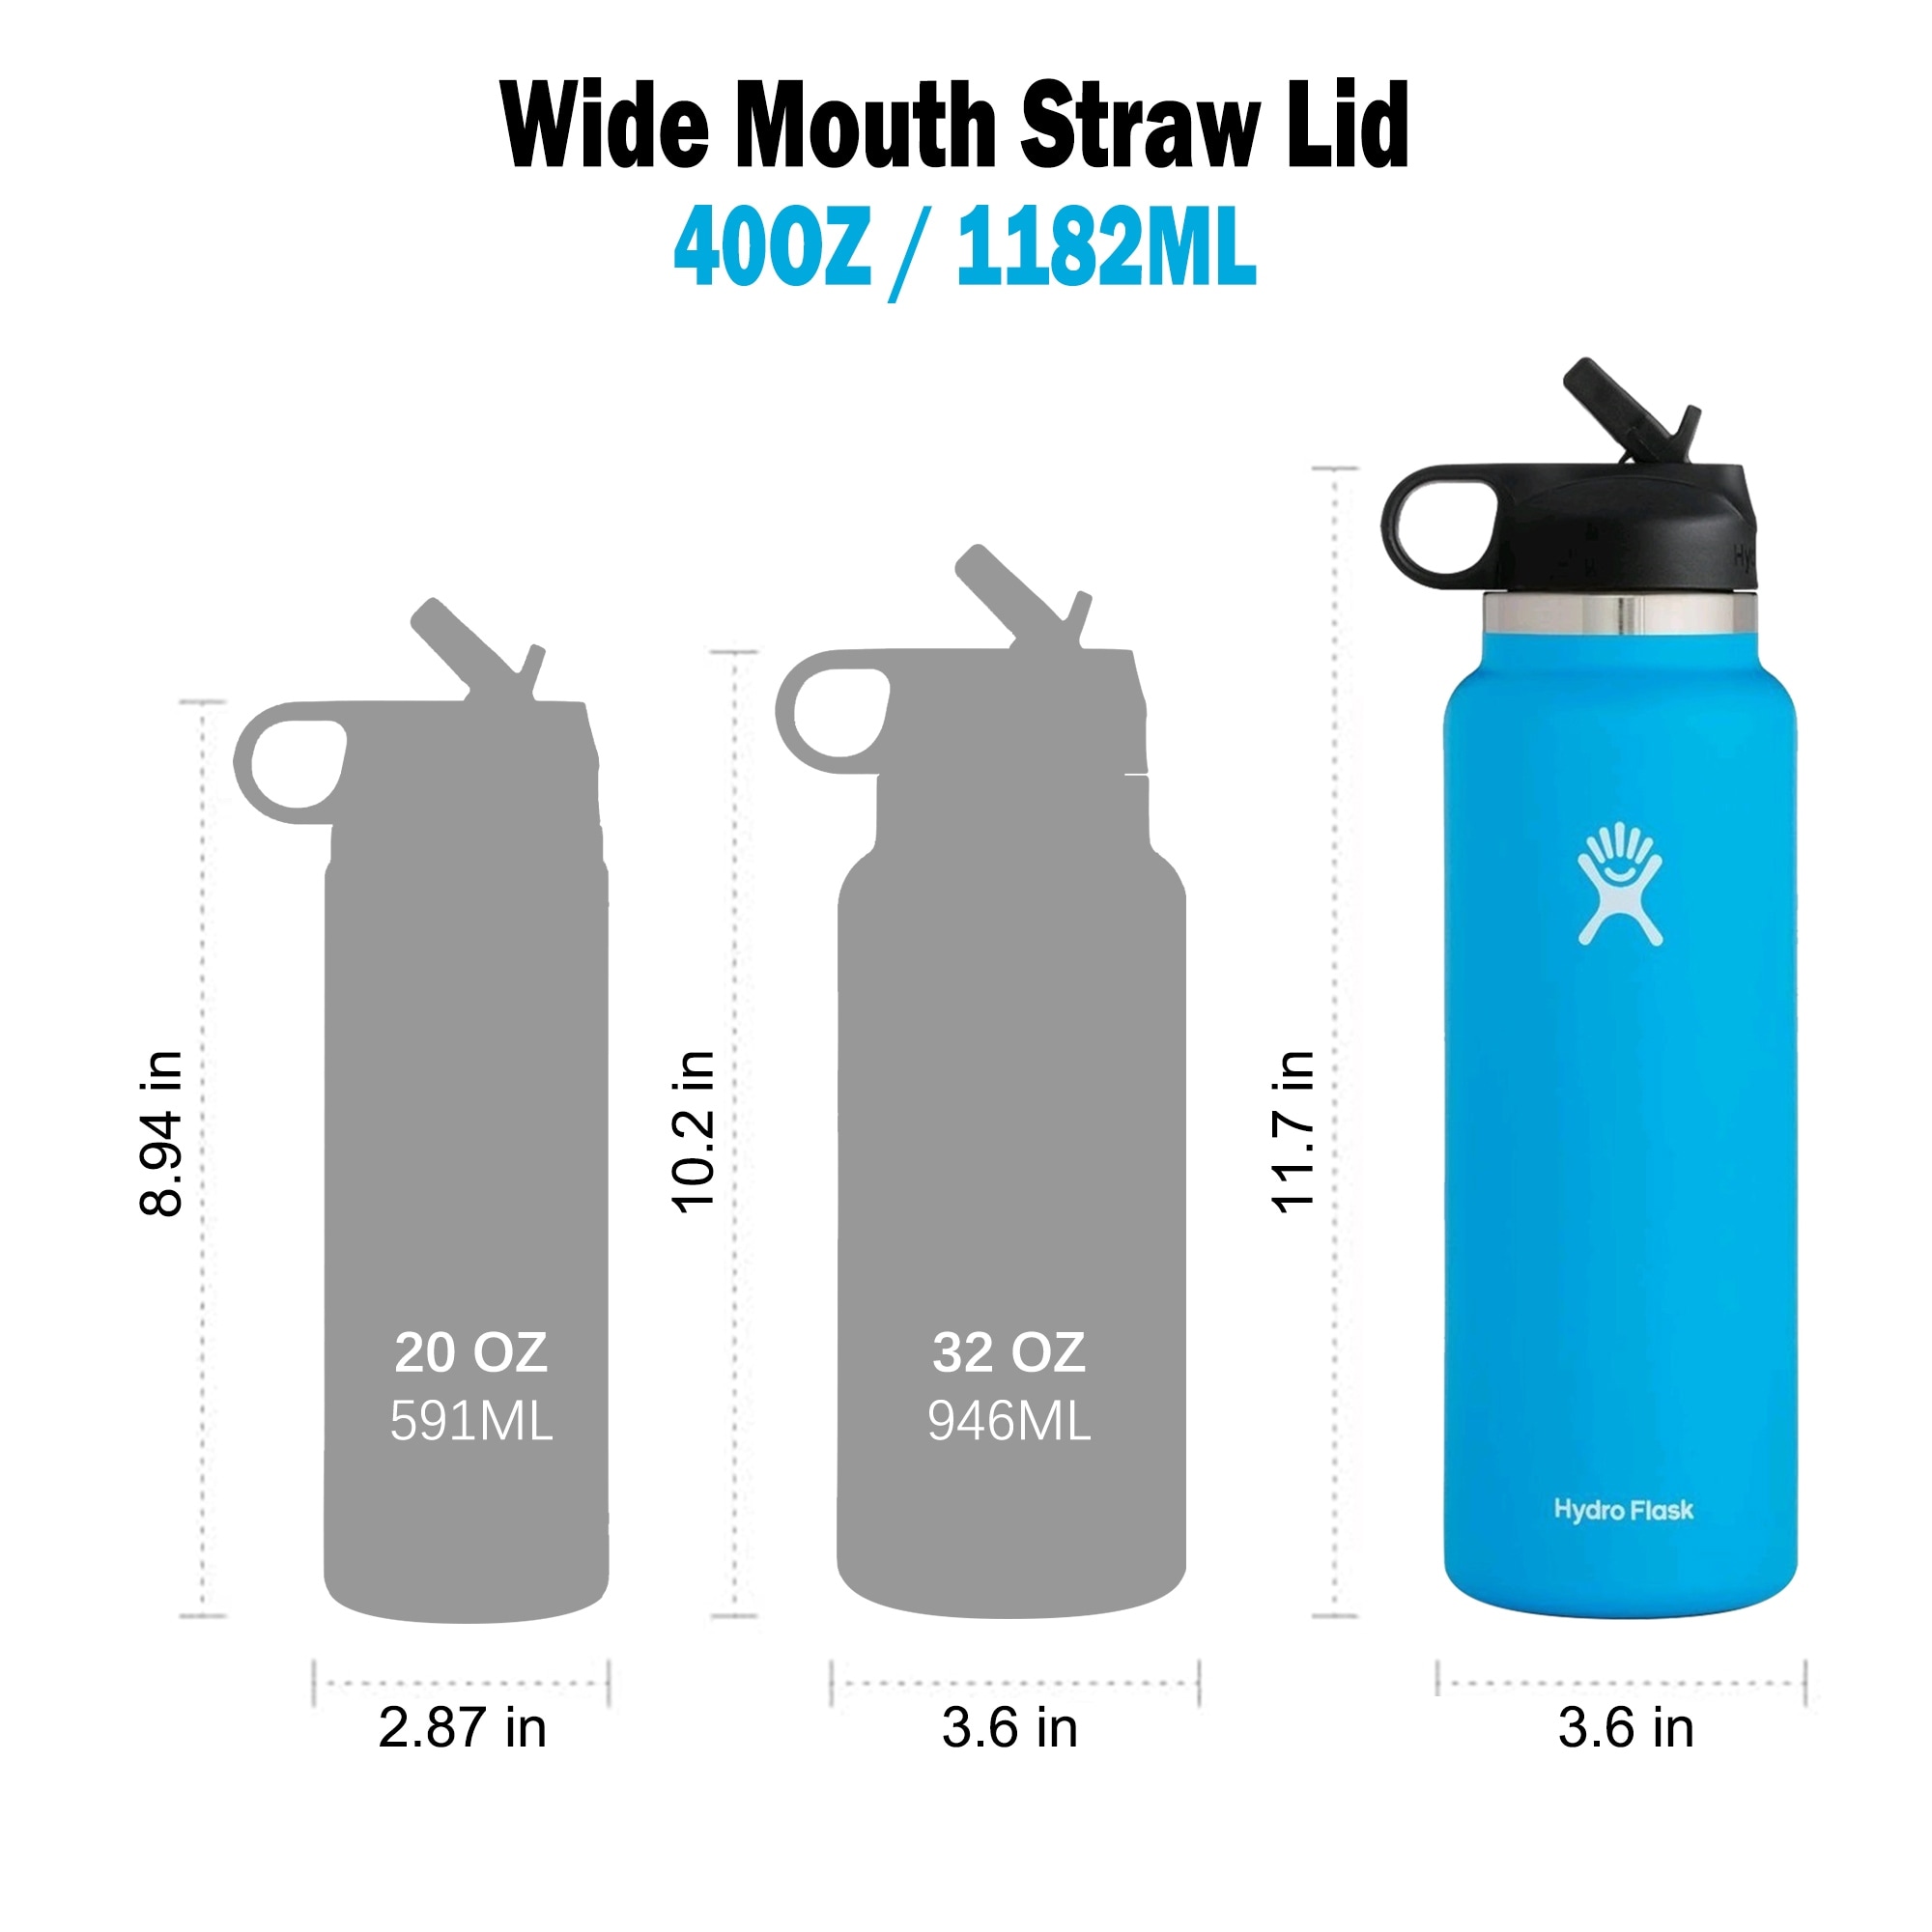 https://ak1.ostkcdn.com/images/products/is/images/direct/62595946bb2750c2da0036caf05ed02122d89ed5/Hydro-Flask-40oz-Wide-Mouth-Straw-Lid.jpg